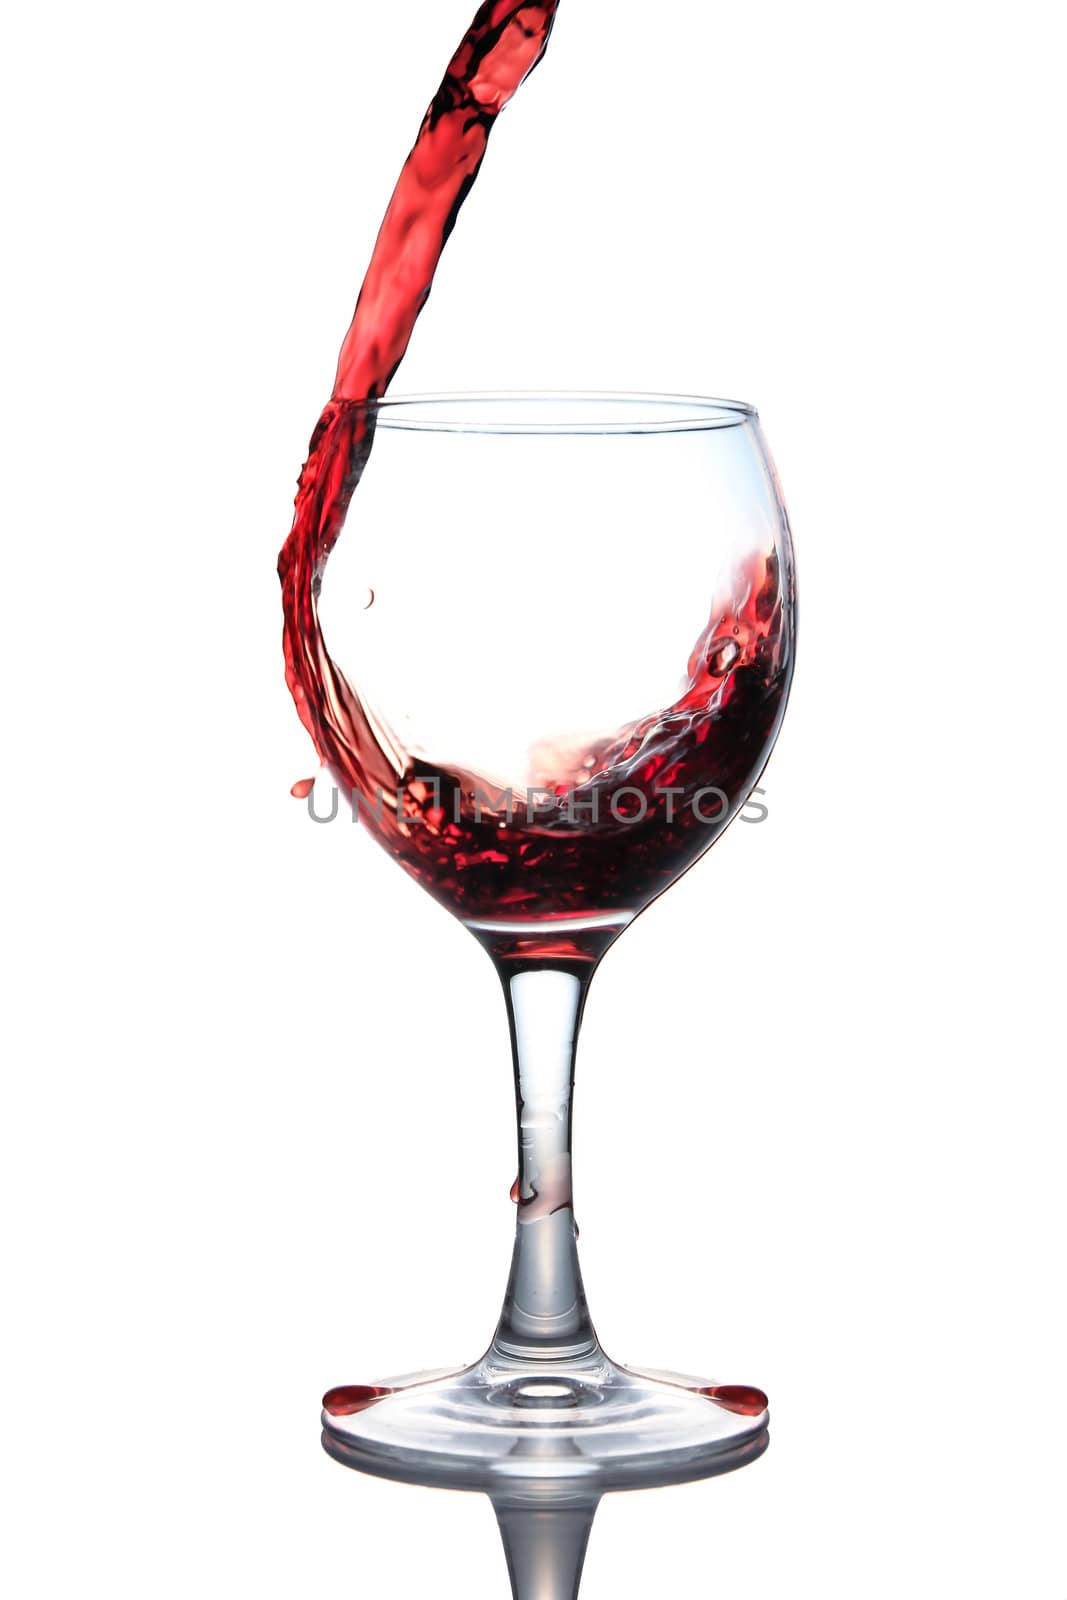 red wine pouring into glass isolated on white background 